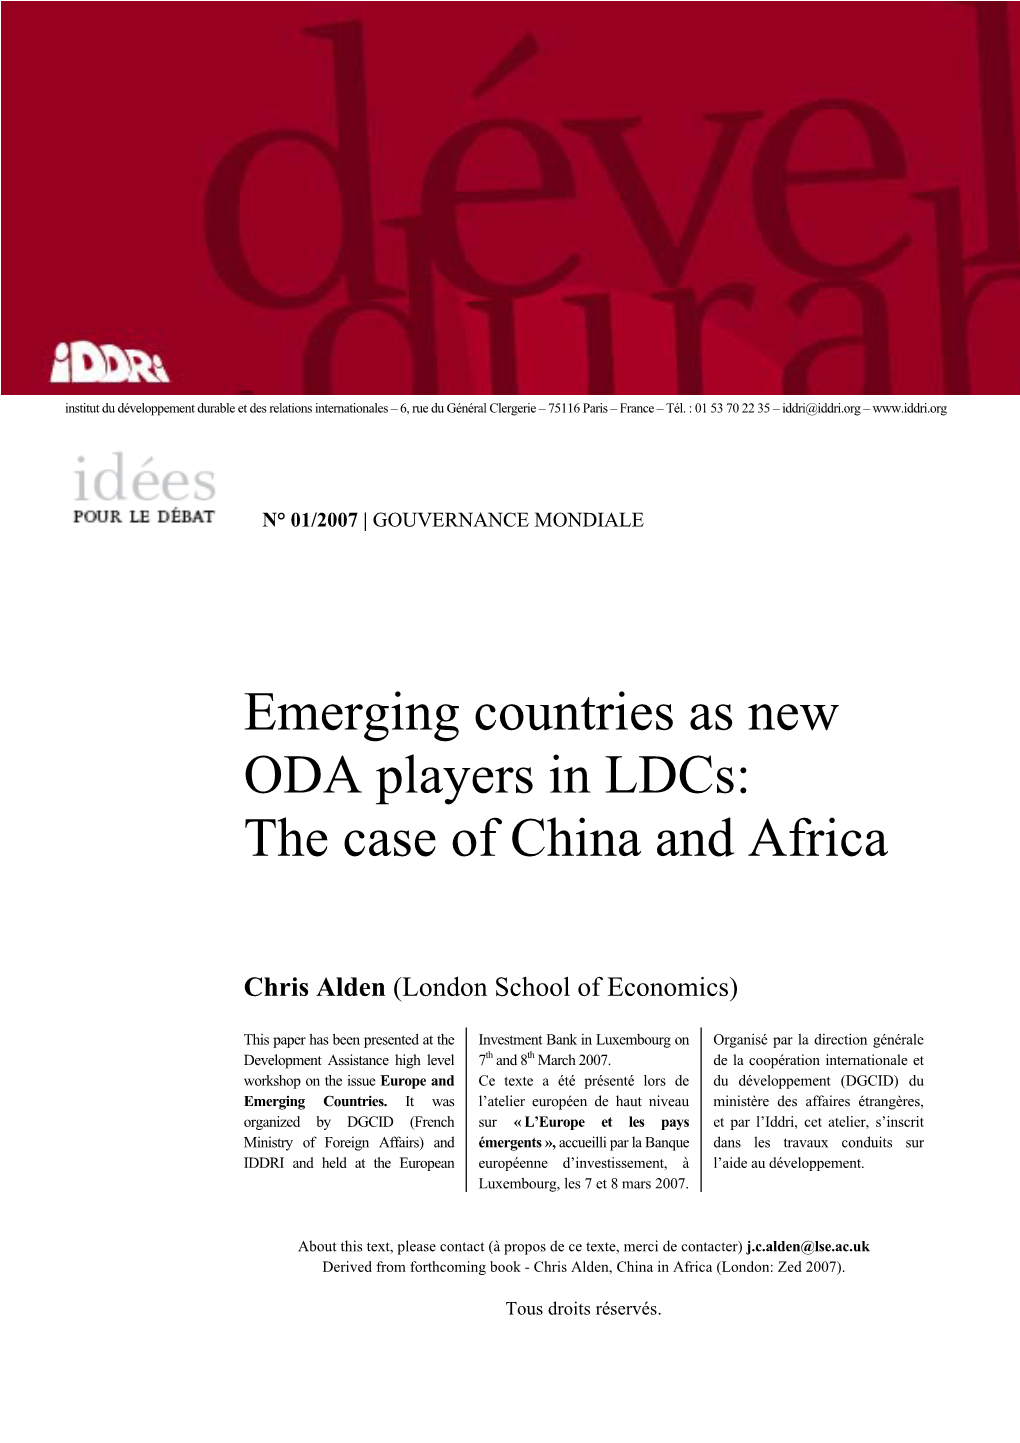 Emerging Countries As New ODA Players in Ldcs: the Case of China and Africa